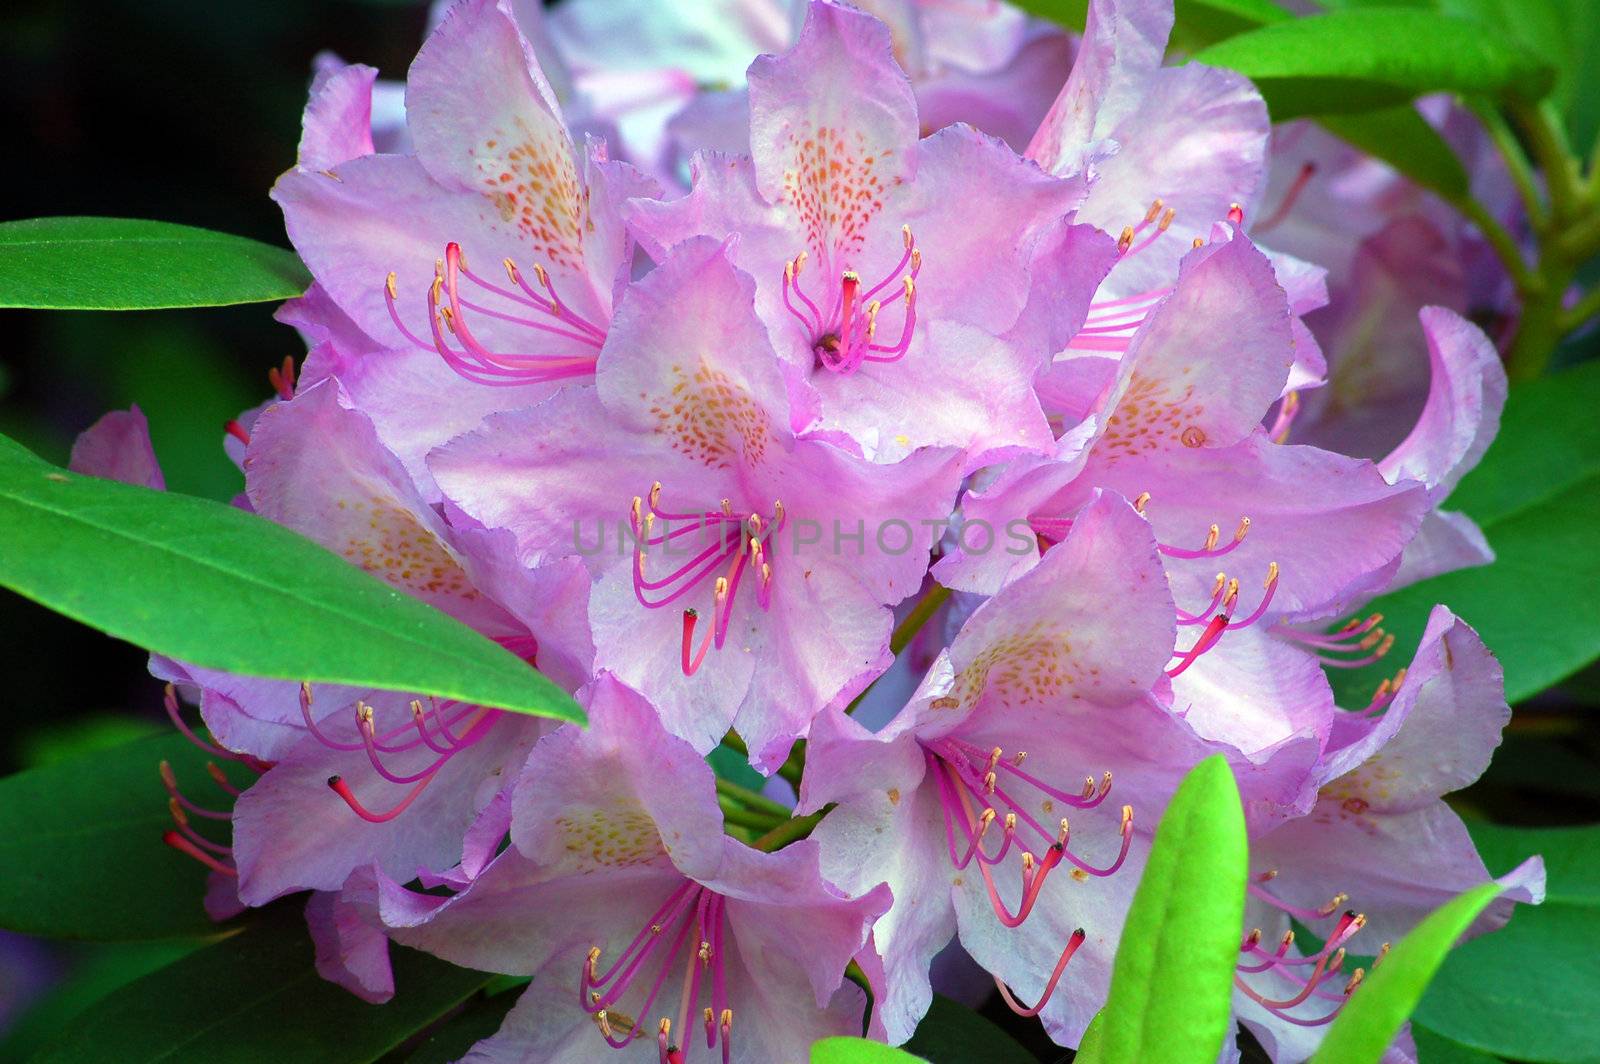 Fine pink rhododendron by PavelS